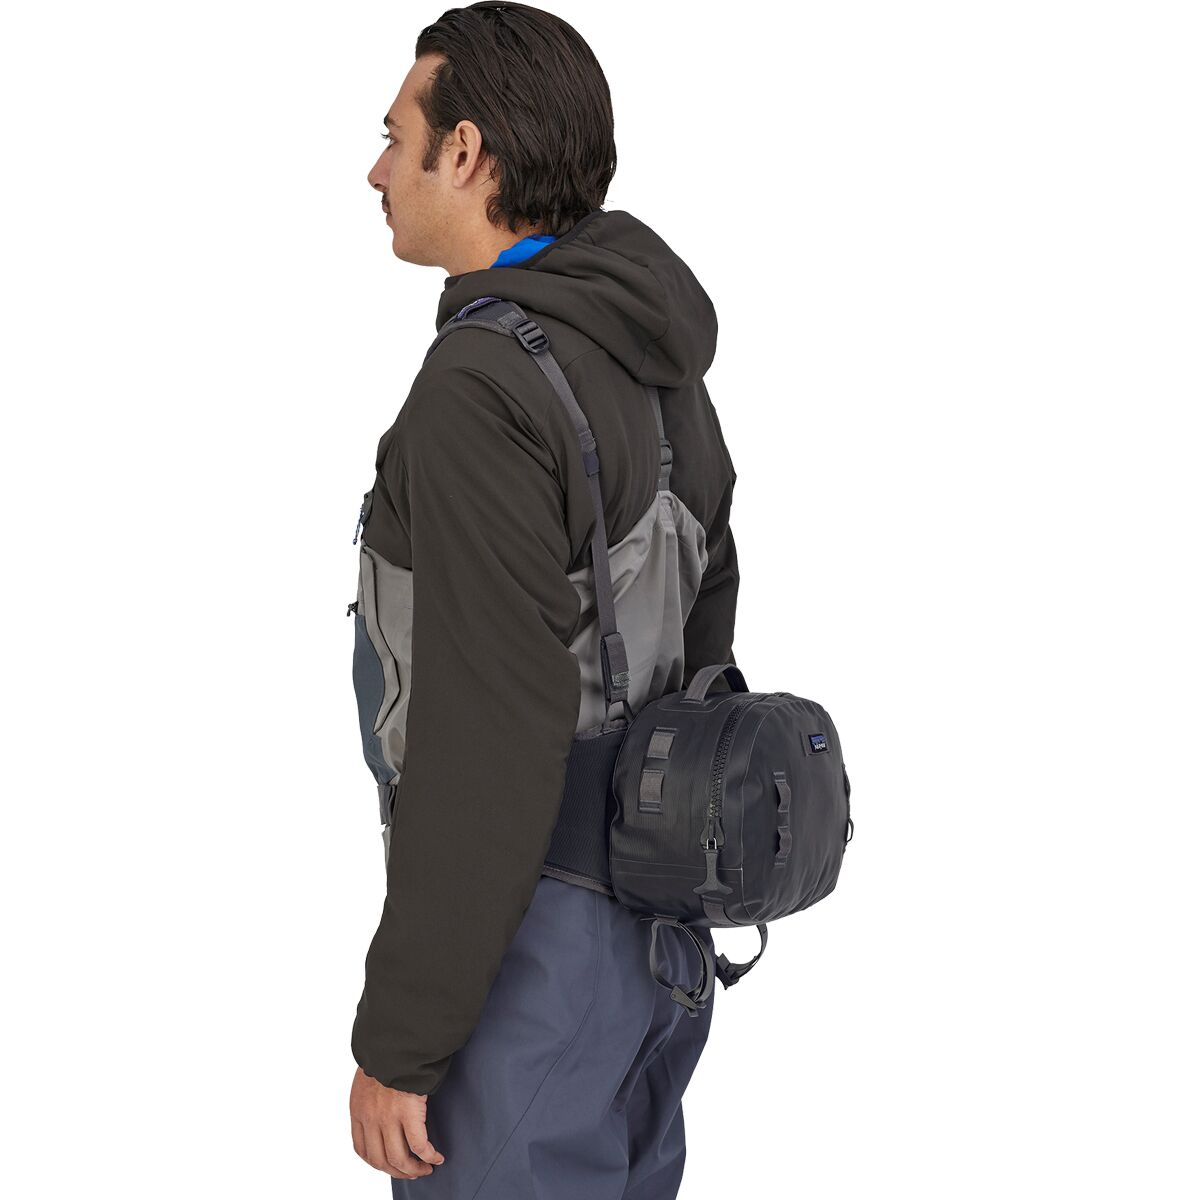 Embrace the Elements: Patagonia Guidewater Hip Pack Review